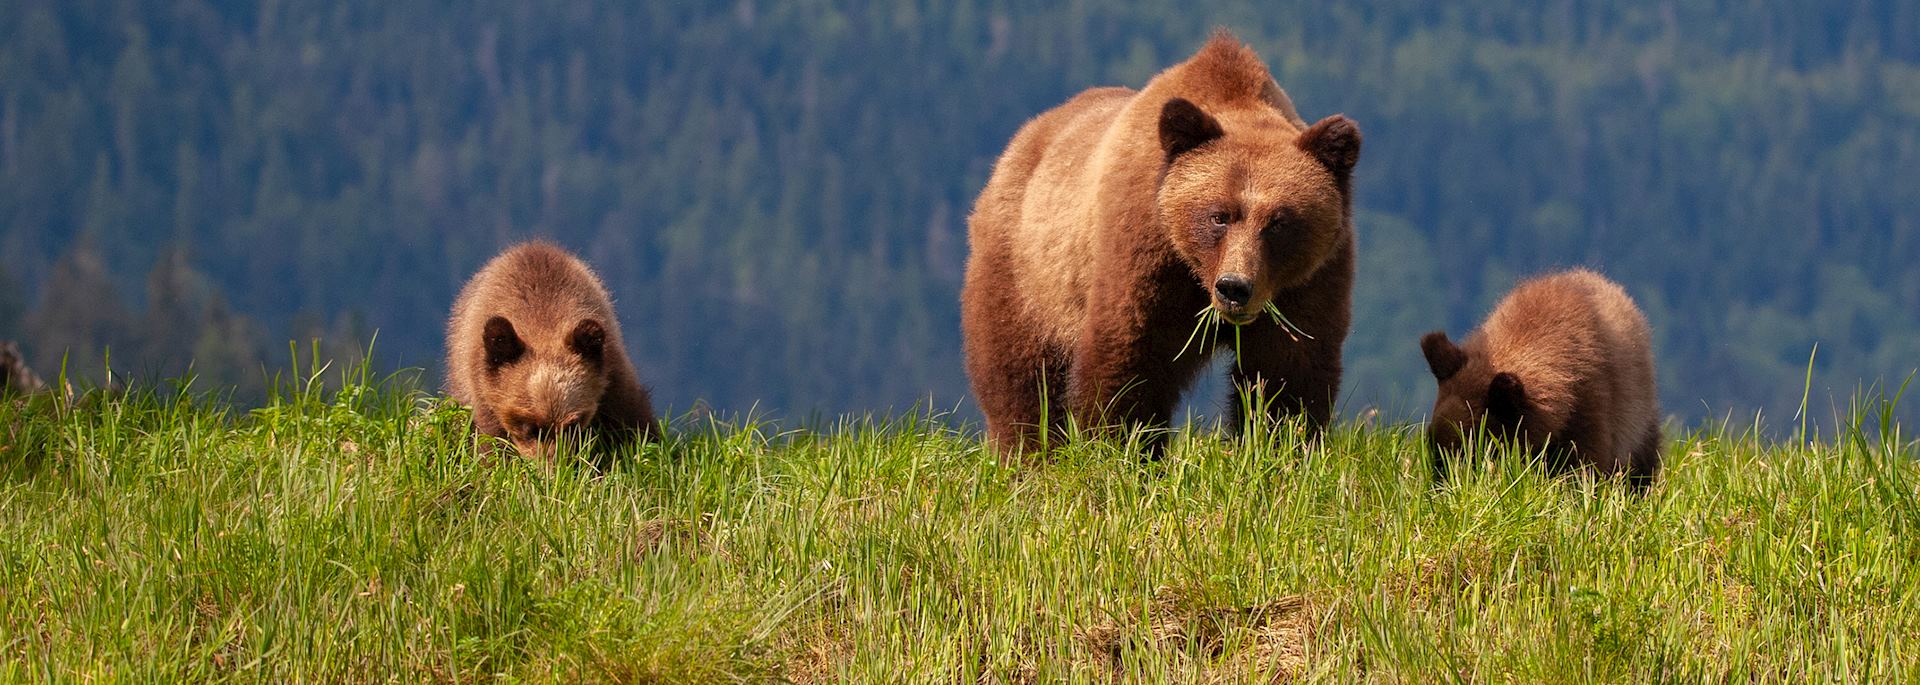 Grizzly bear and her cubs, British Columbia